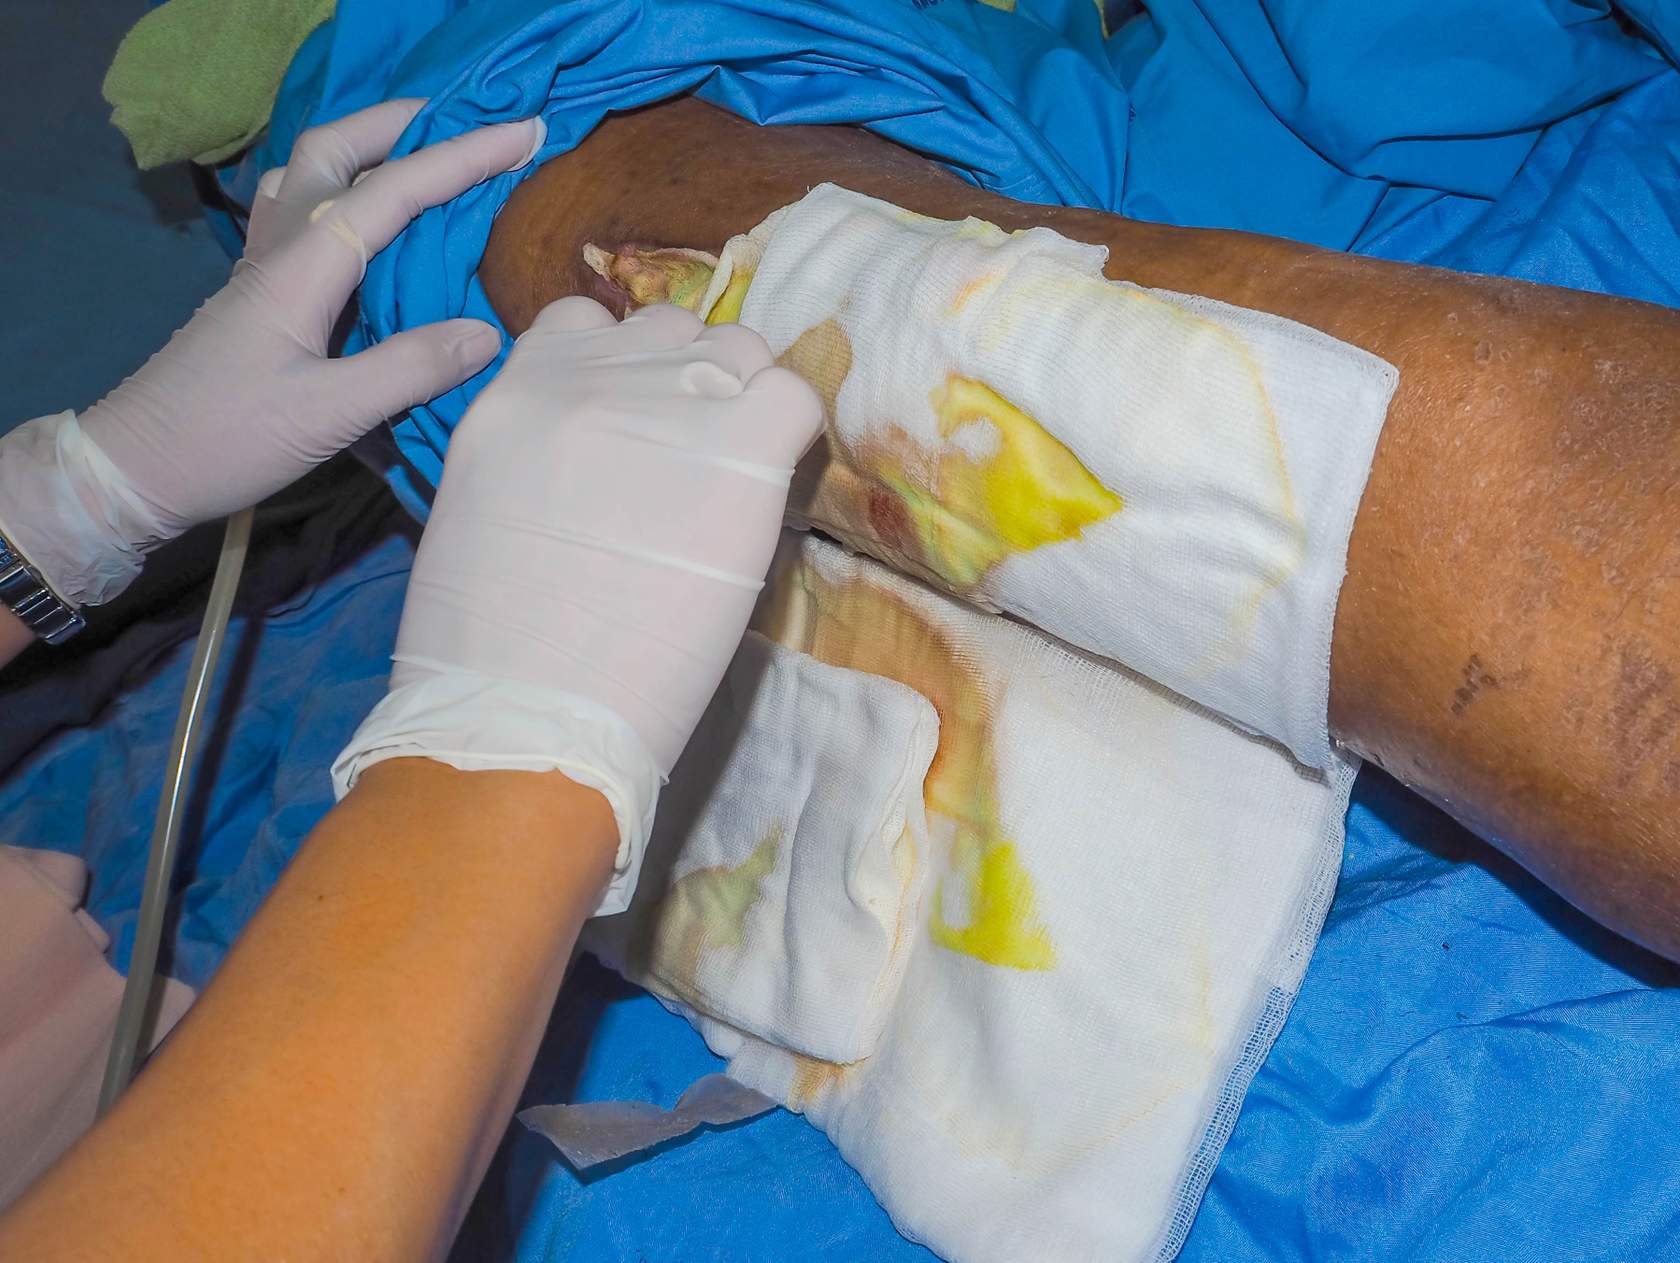 Post-op Wound Care • CAN-Sim